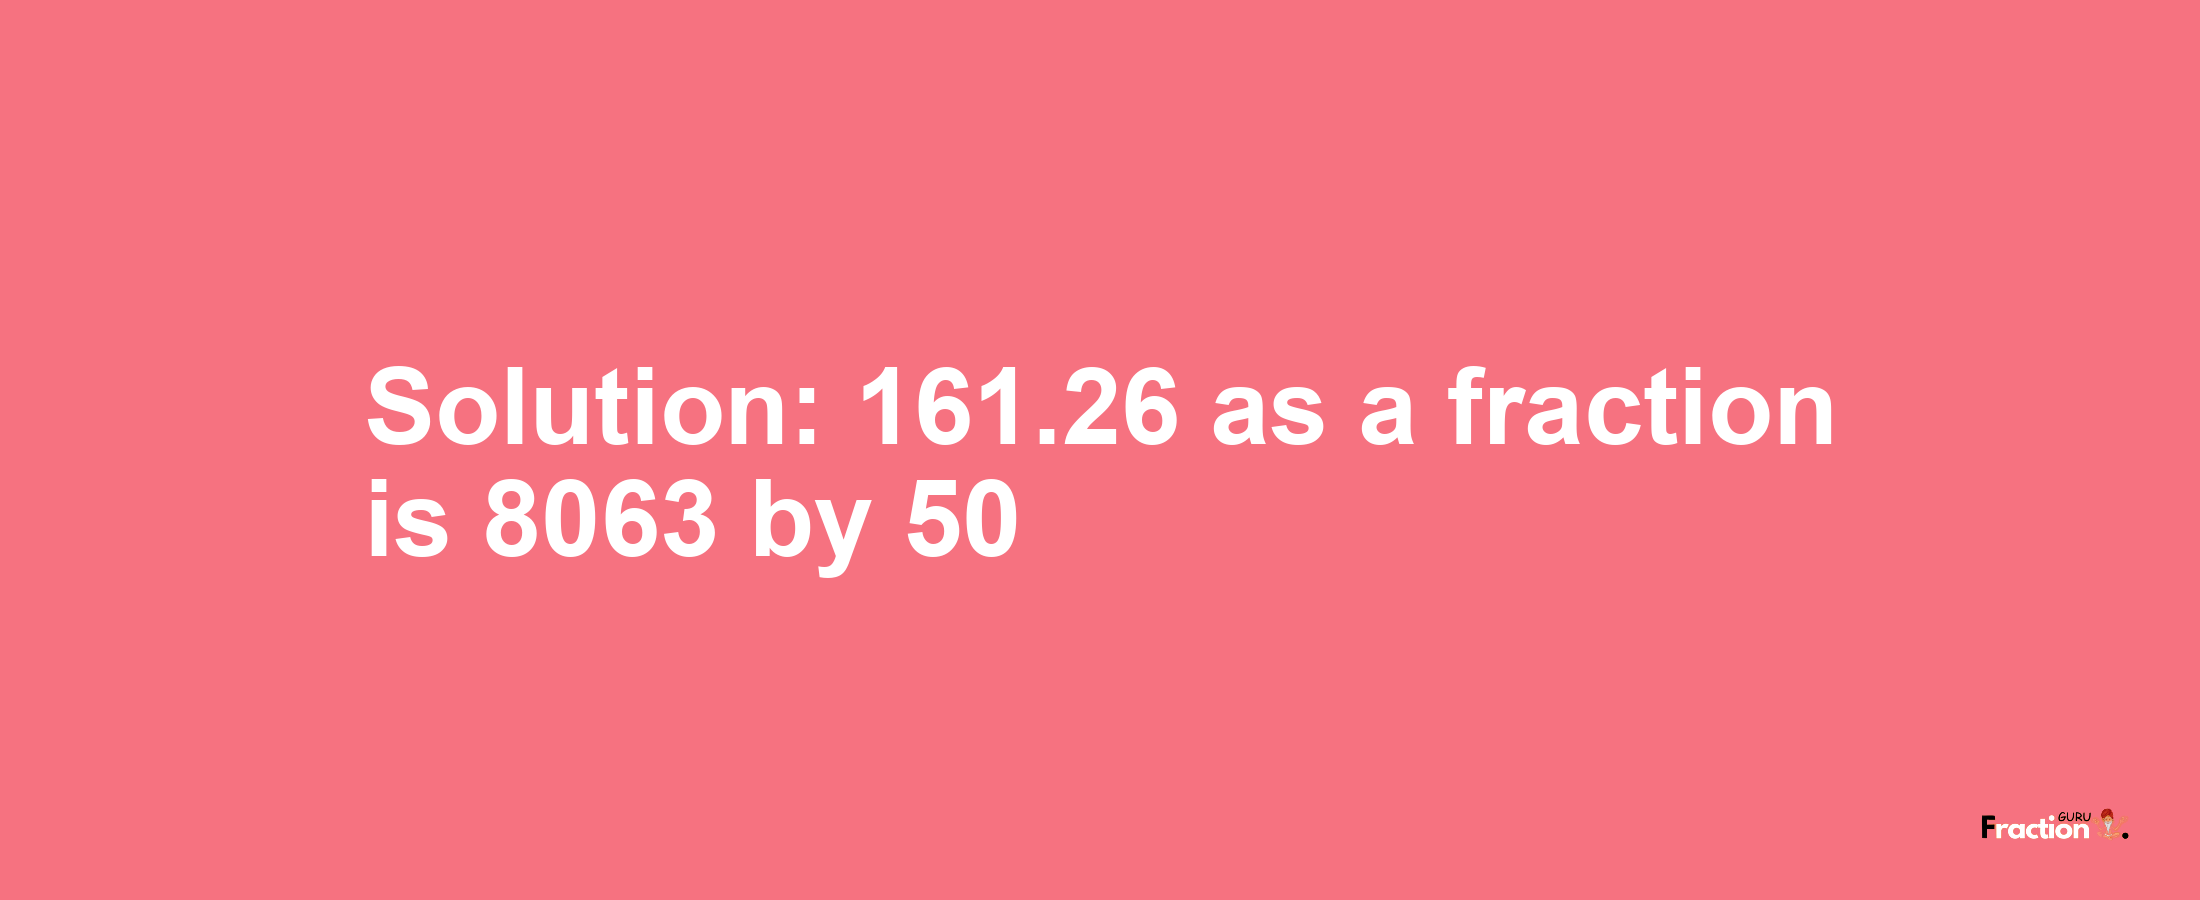 Solution:161.26 as a fraction is 8063/50